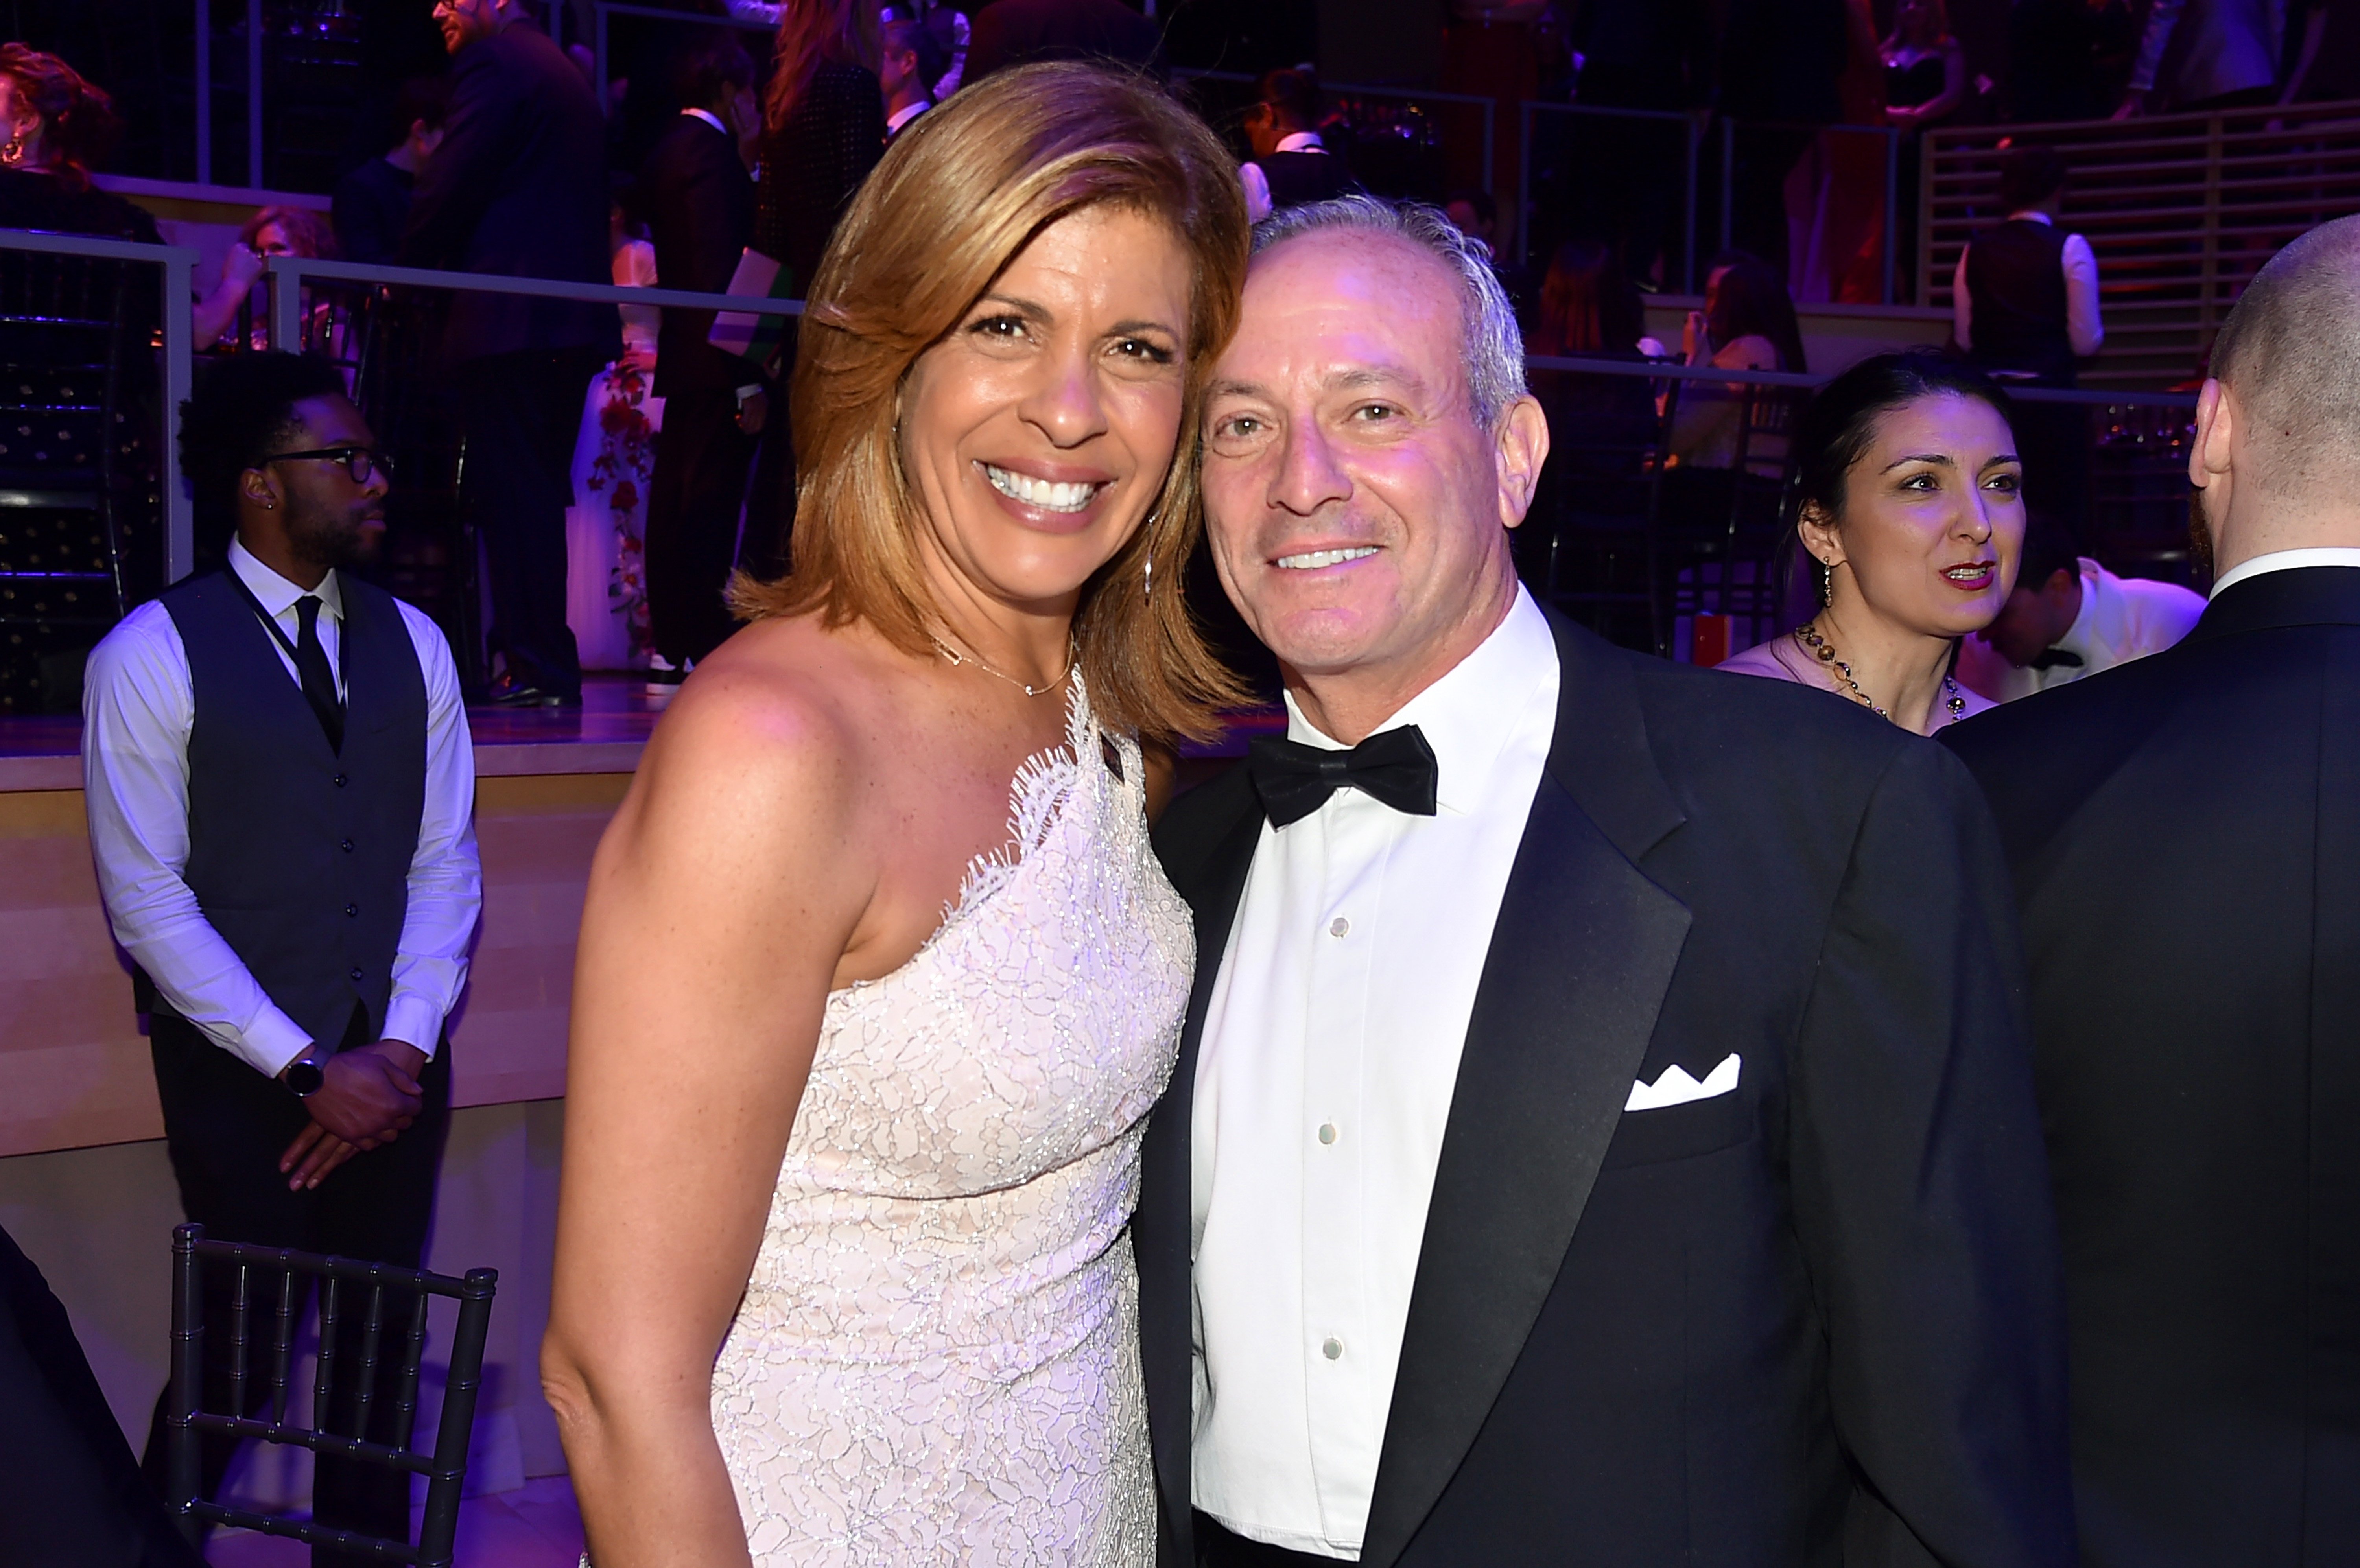 Hoda Kotb and Joel Schiffman attend the 2018 TIME 100 Gala at Jazz at Lincoln Center on April 24, 2018 in New York City | Photo: Getty Images